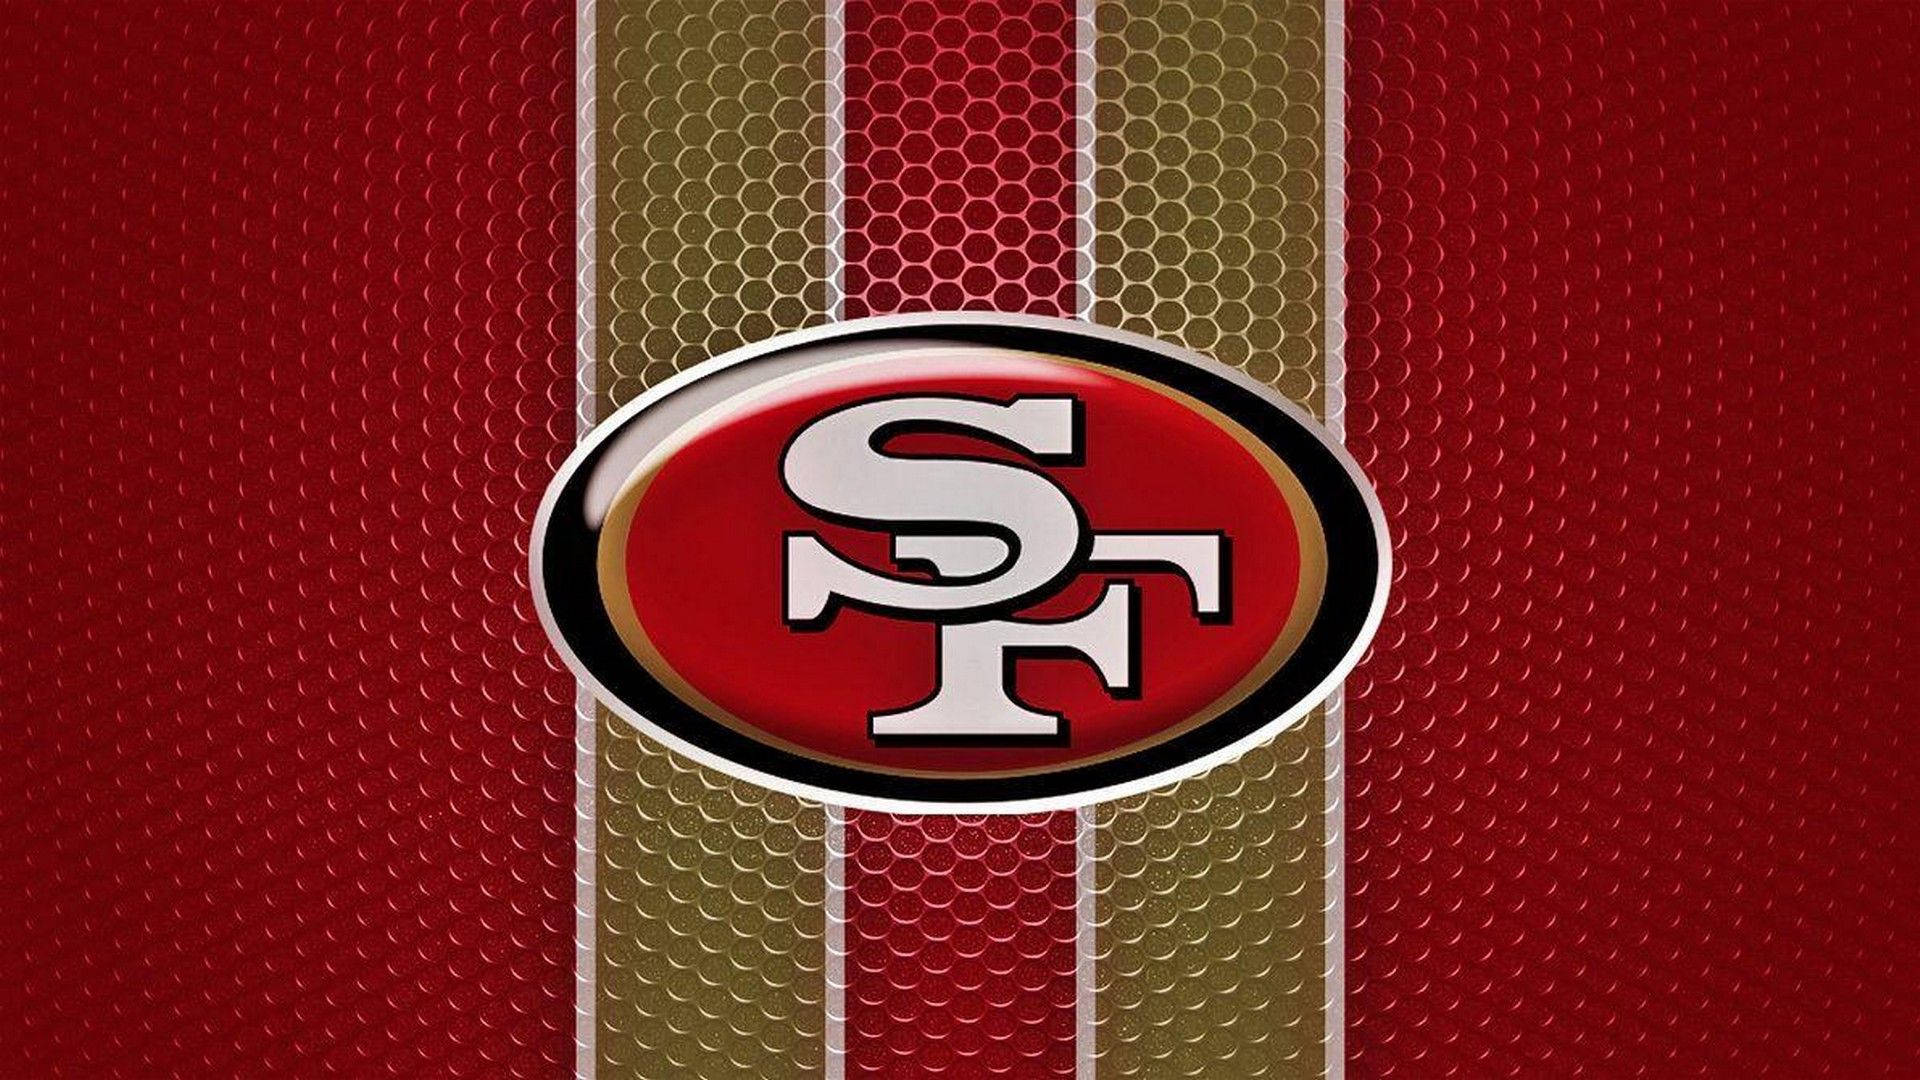 Show your team spirit with the 49ers Wallpaper